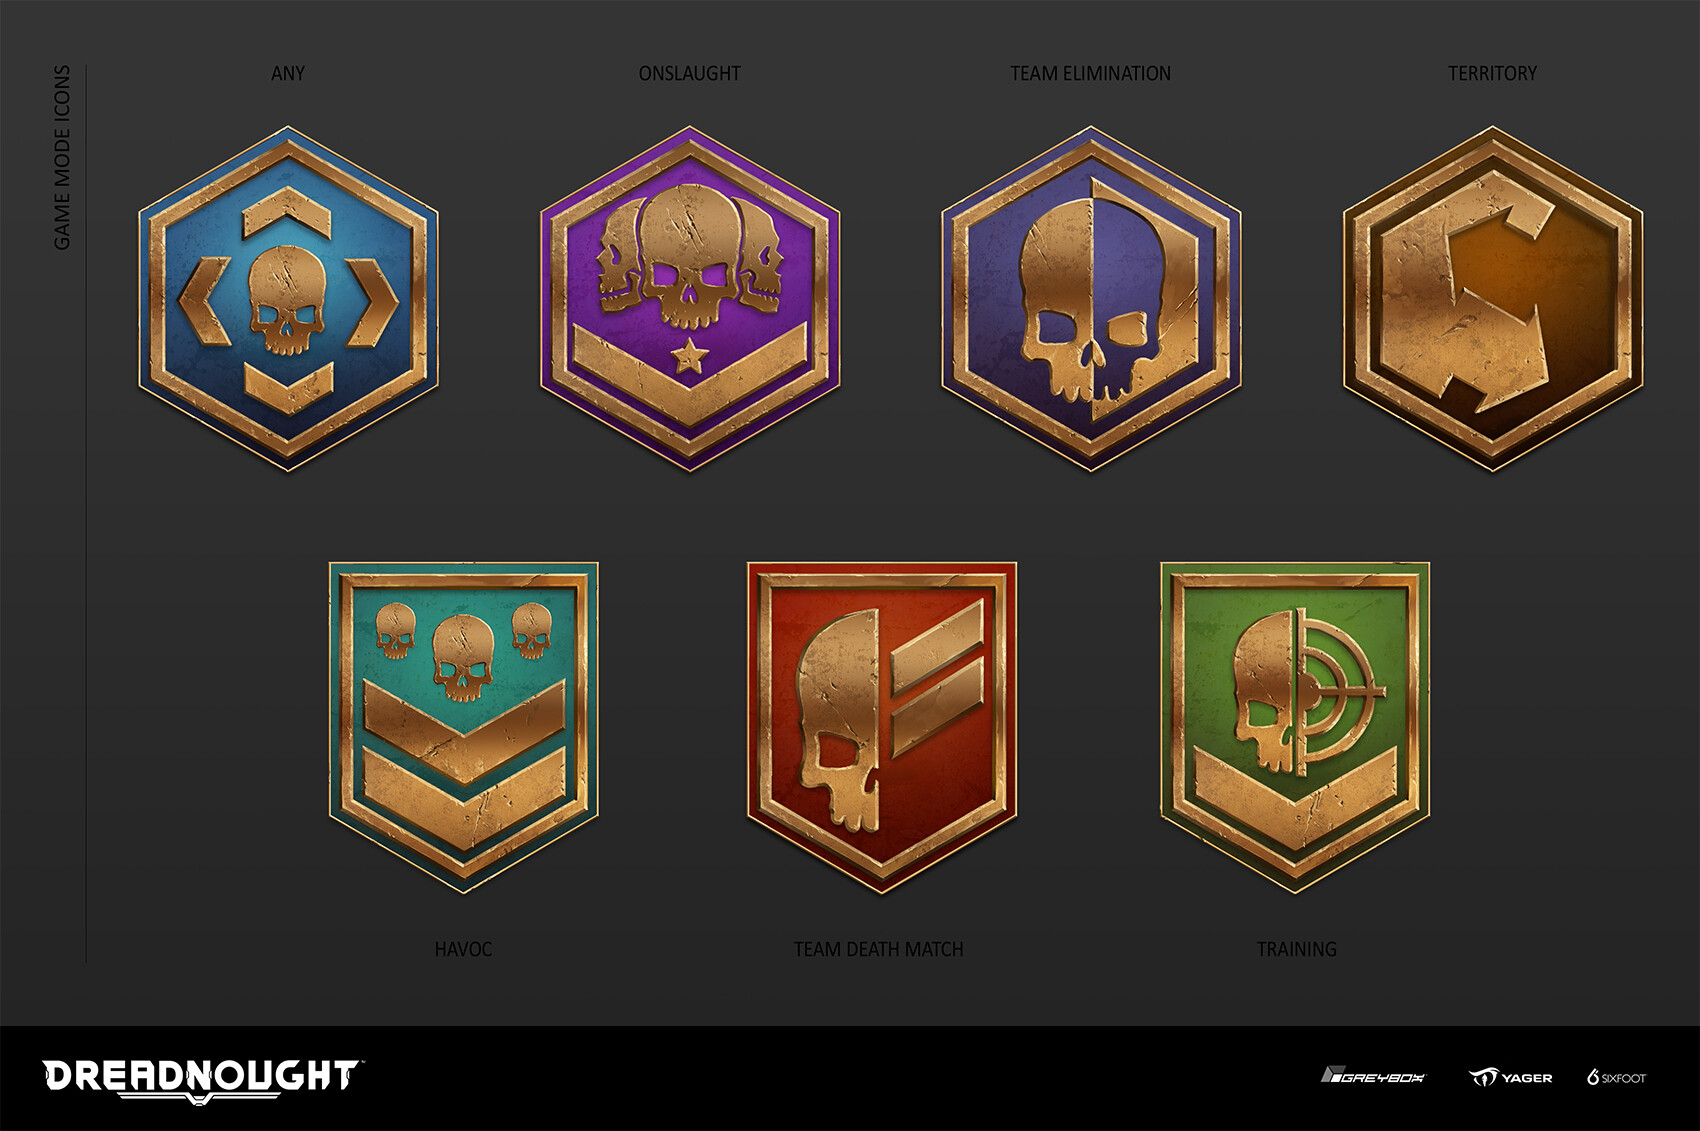 Michele Tanner - DREADNOUGHT - GAME MODE ICONS